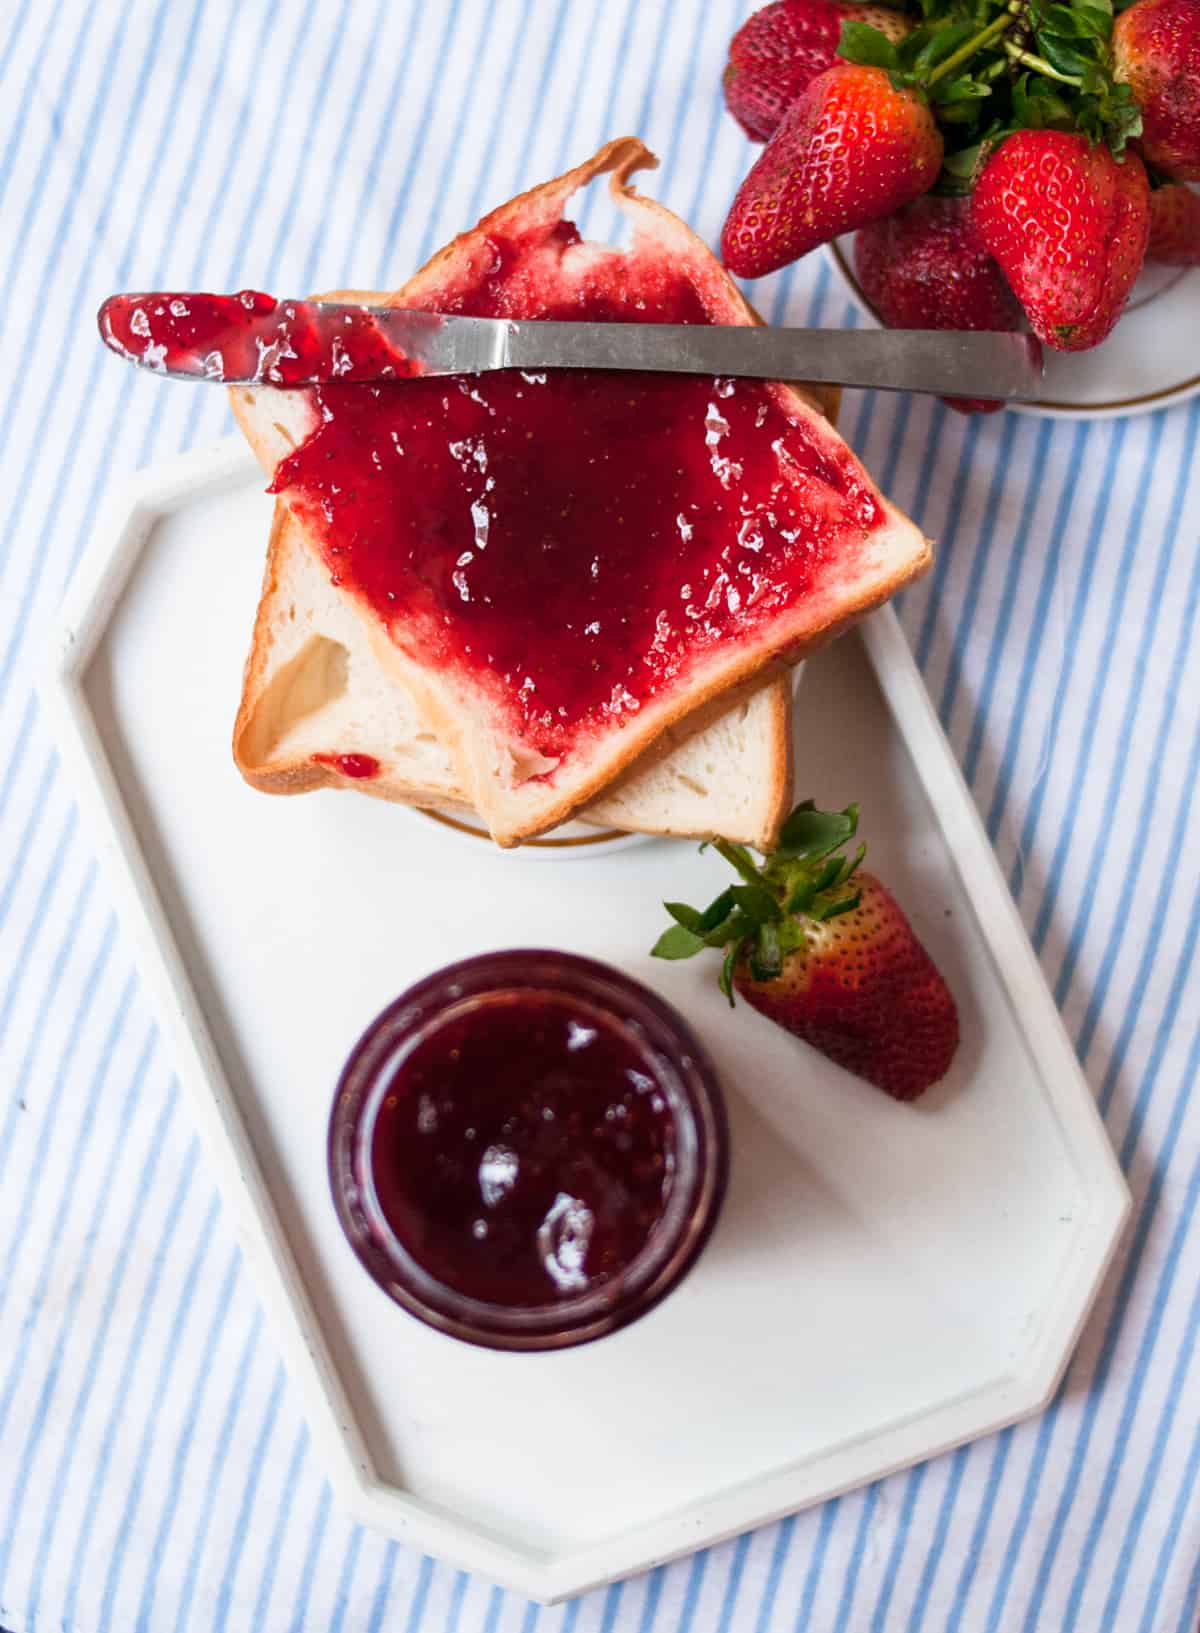 Strawberry jam on the bread slices with a butter knife over it on the blue striped kitchen towel.